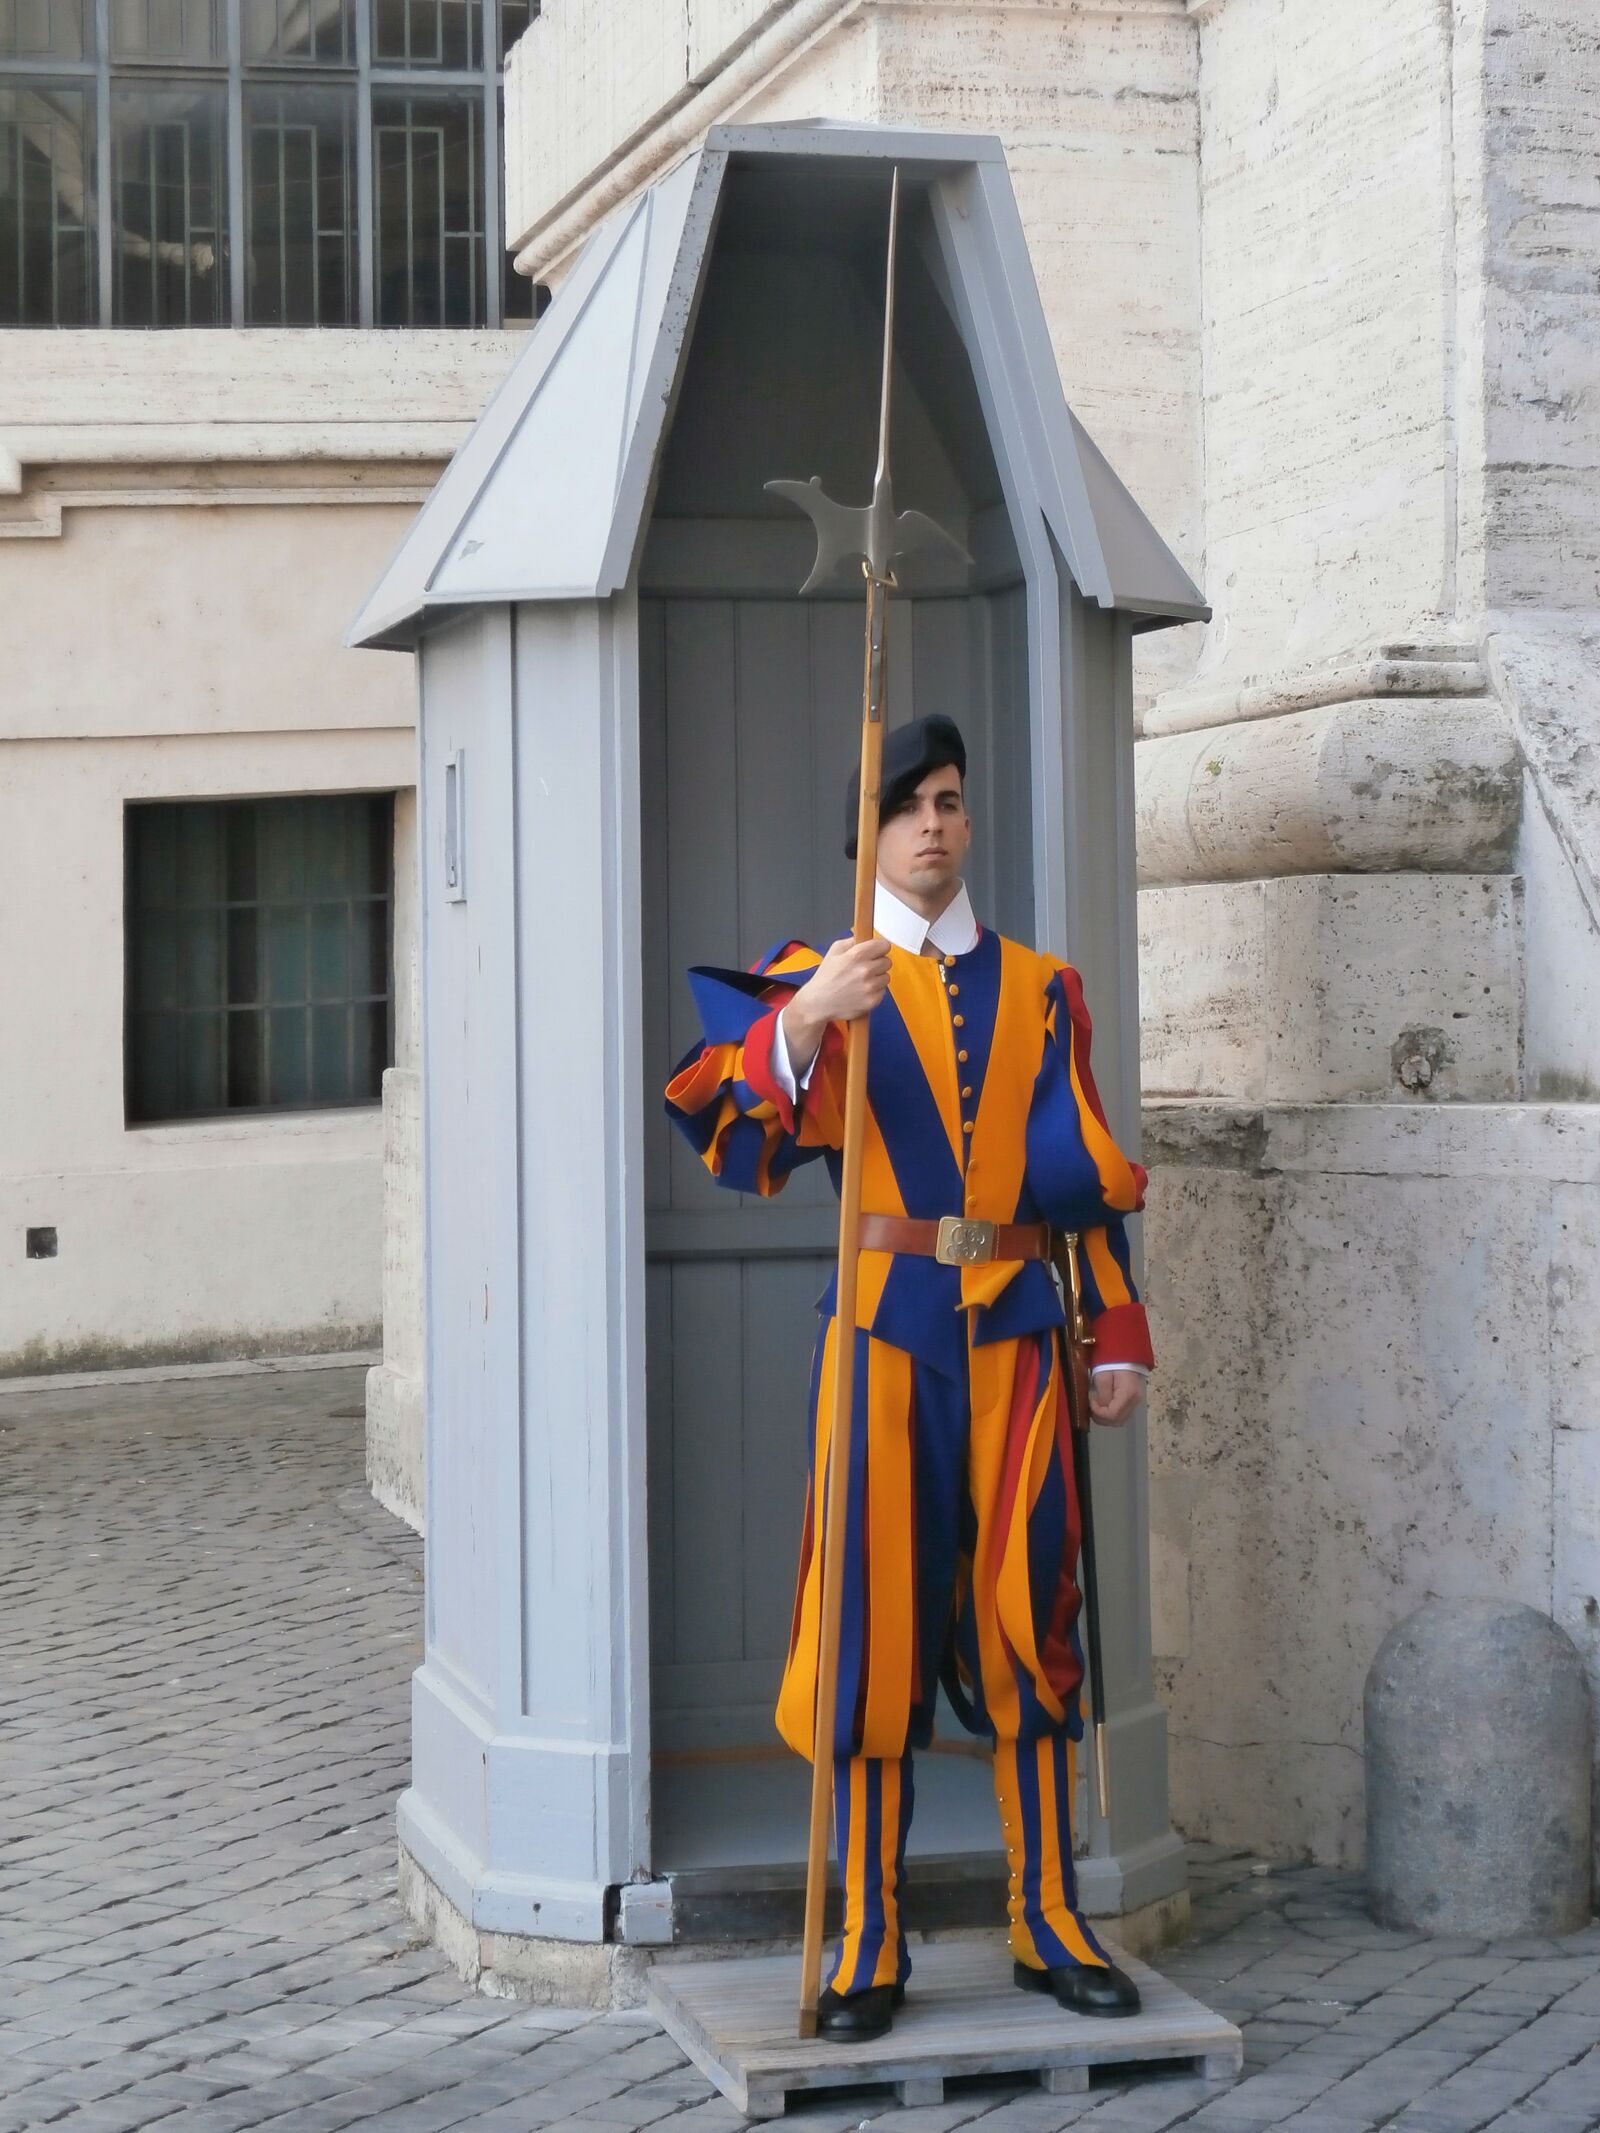 Olympus VG170 sample photo. Swiss guards, basilica, soldier photography